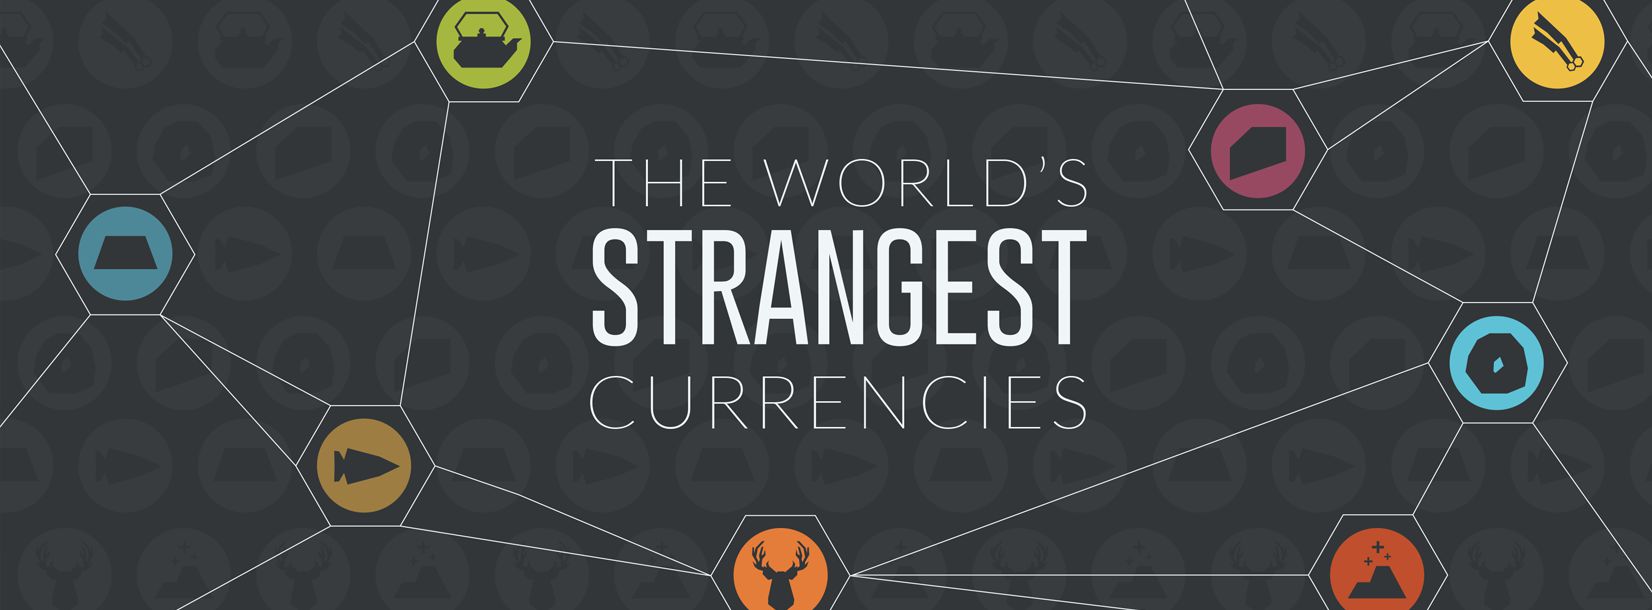 The World’s Strangest Currencies (Infographic)